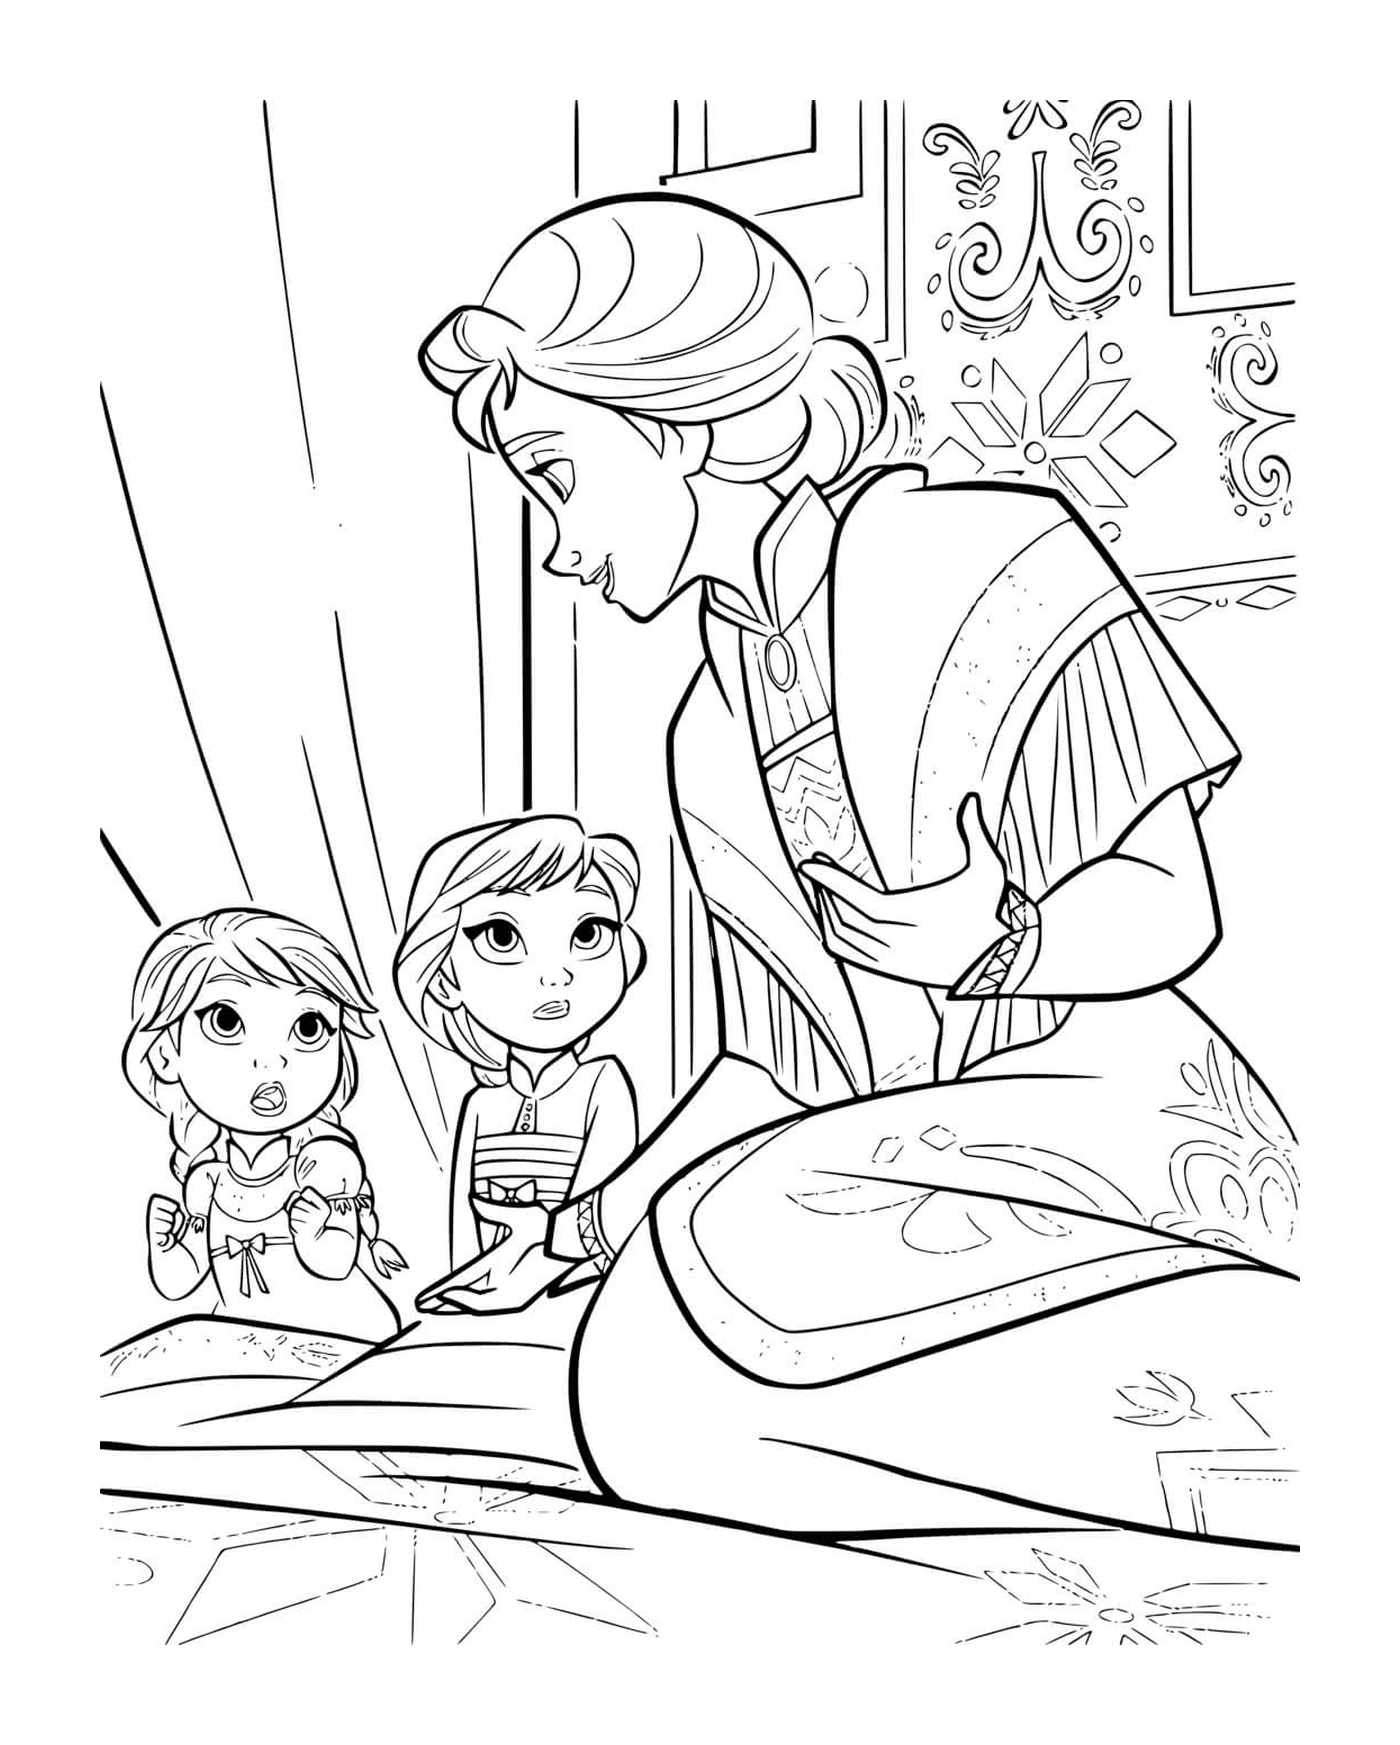  Anna, Elsa, and their mother 